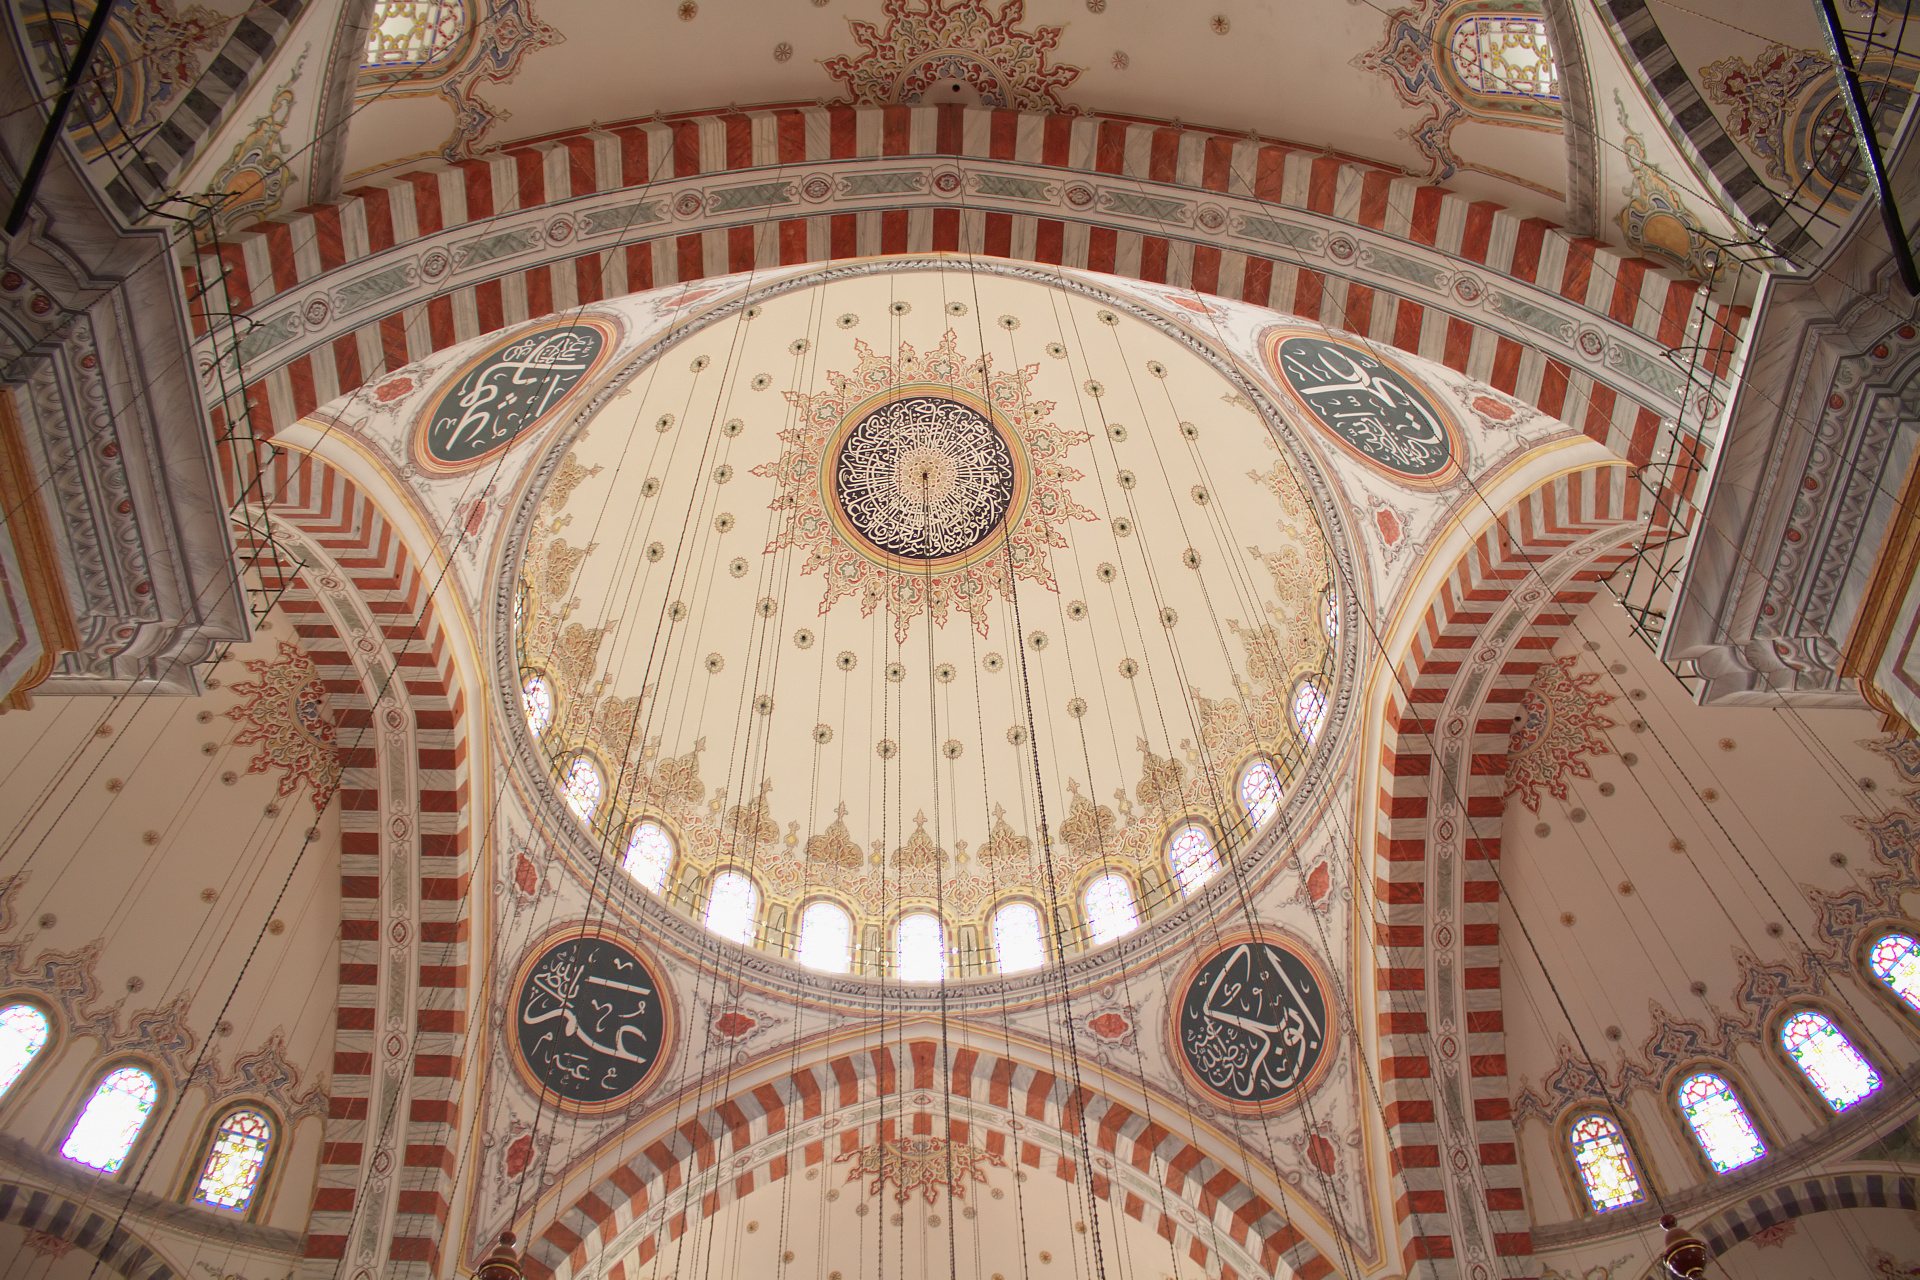 Fatih Mosque (Travels » Istanbul » Mosques)